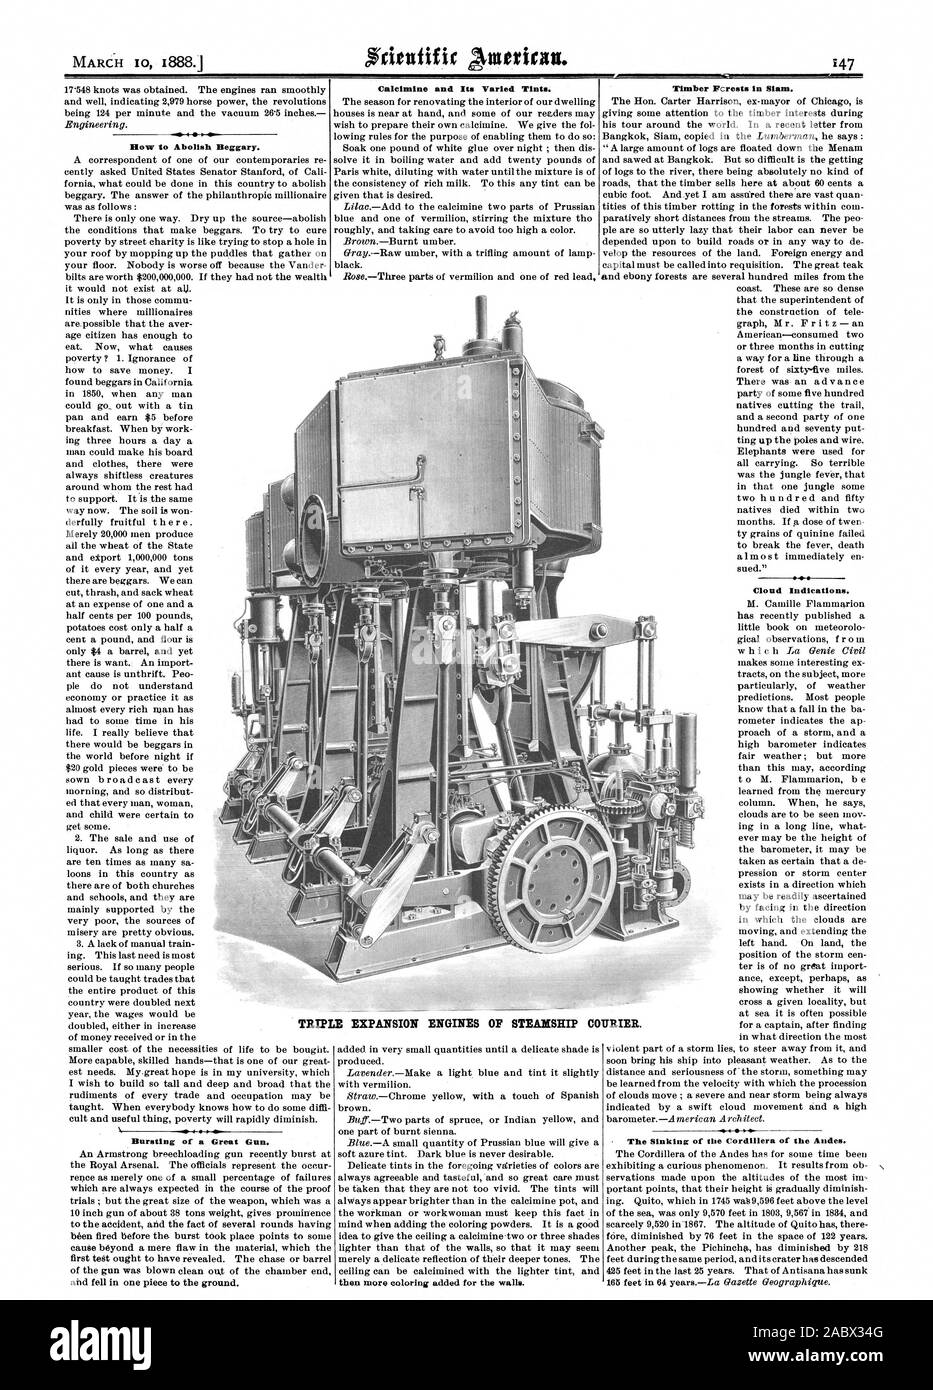 How to Abolish Beggary. Bursting of a Great Gun. Calcimine and Its Varied Tints. Timber Fcrests in Siam.  Cloud Indications. The Sinking of the Cordillera of the Andes. TRIPLE EXPANSION ENGINES OF STEAMSHIP C URIER., scientific american, 1888-03-10 Stock Photo